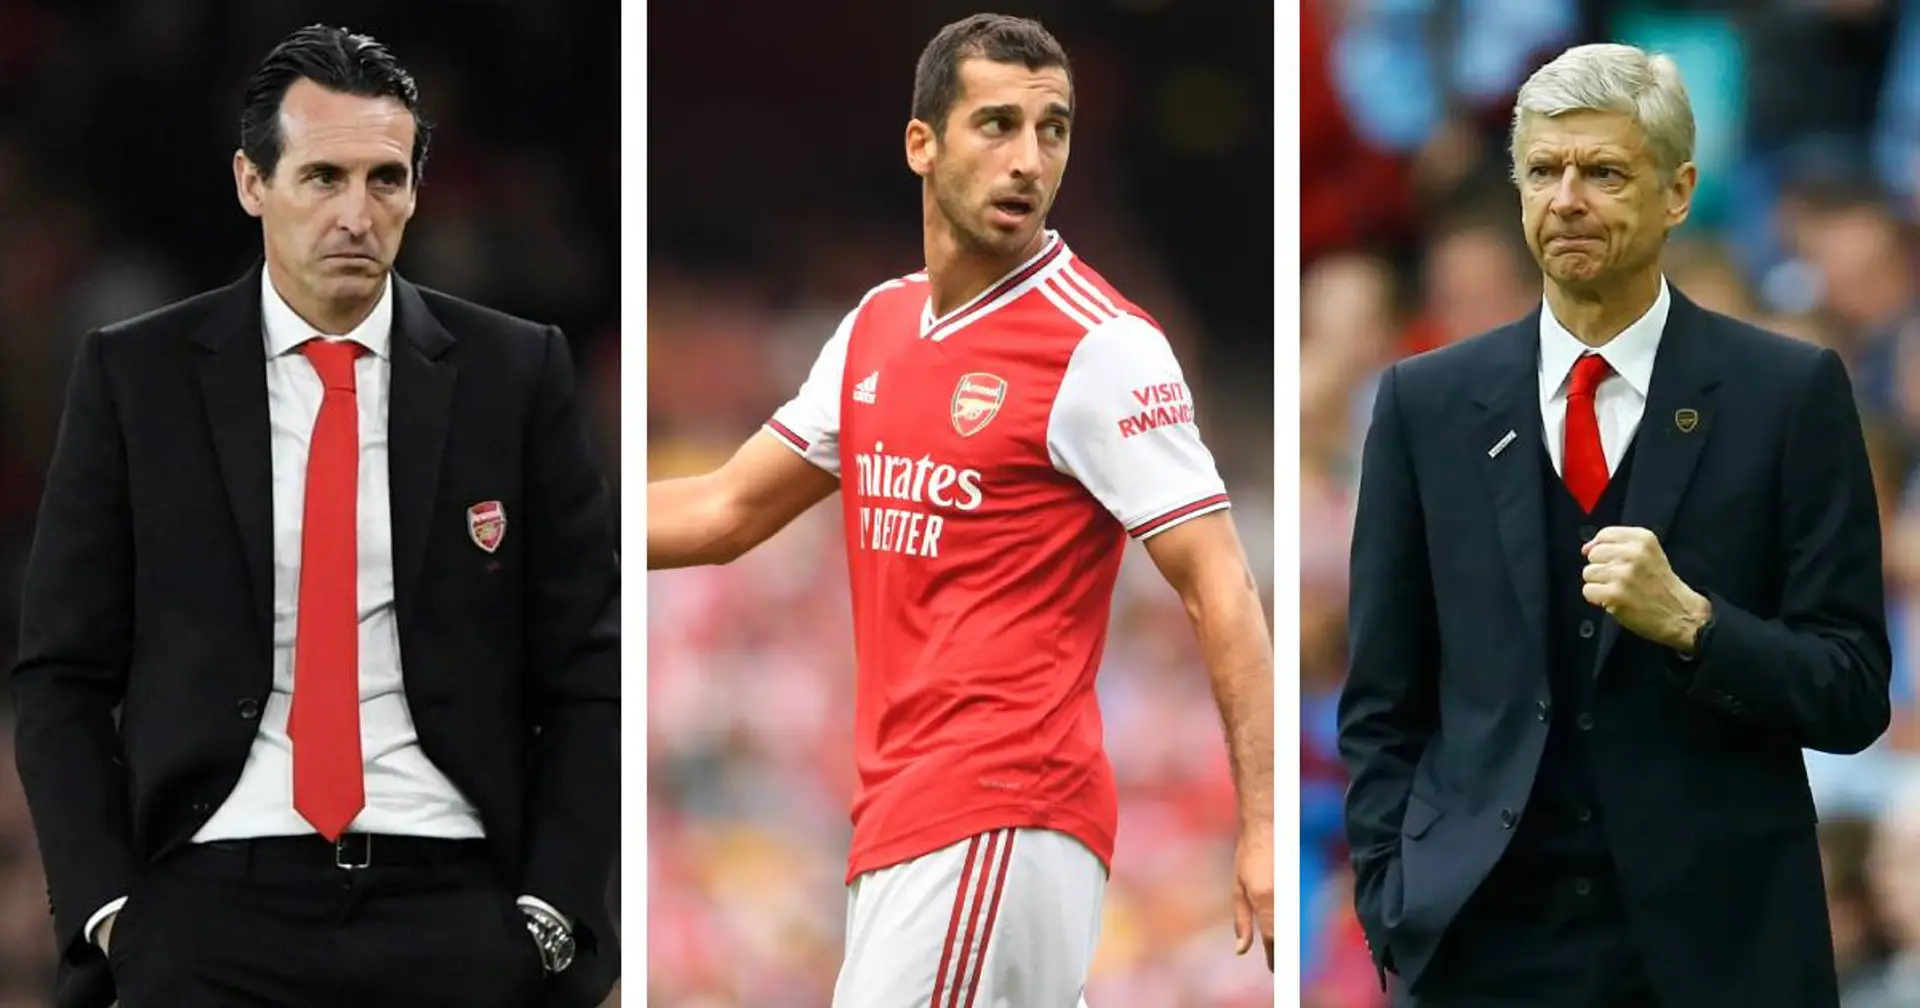 Henrikh Mkhitaryan: 'With Wenger, it was freedom. Emery saw football differently'